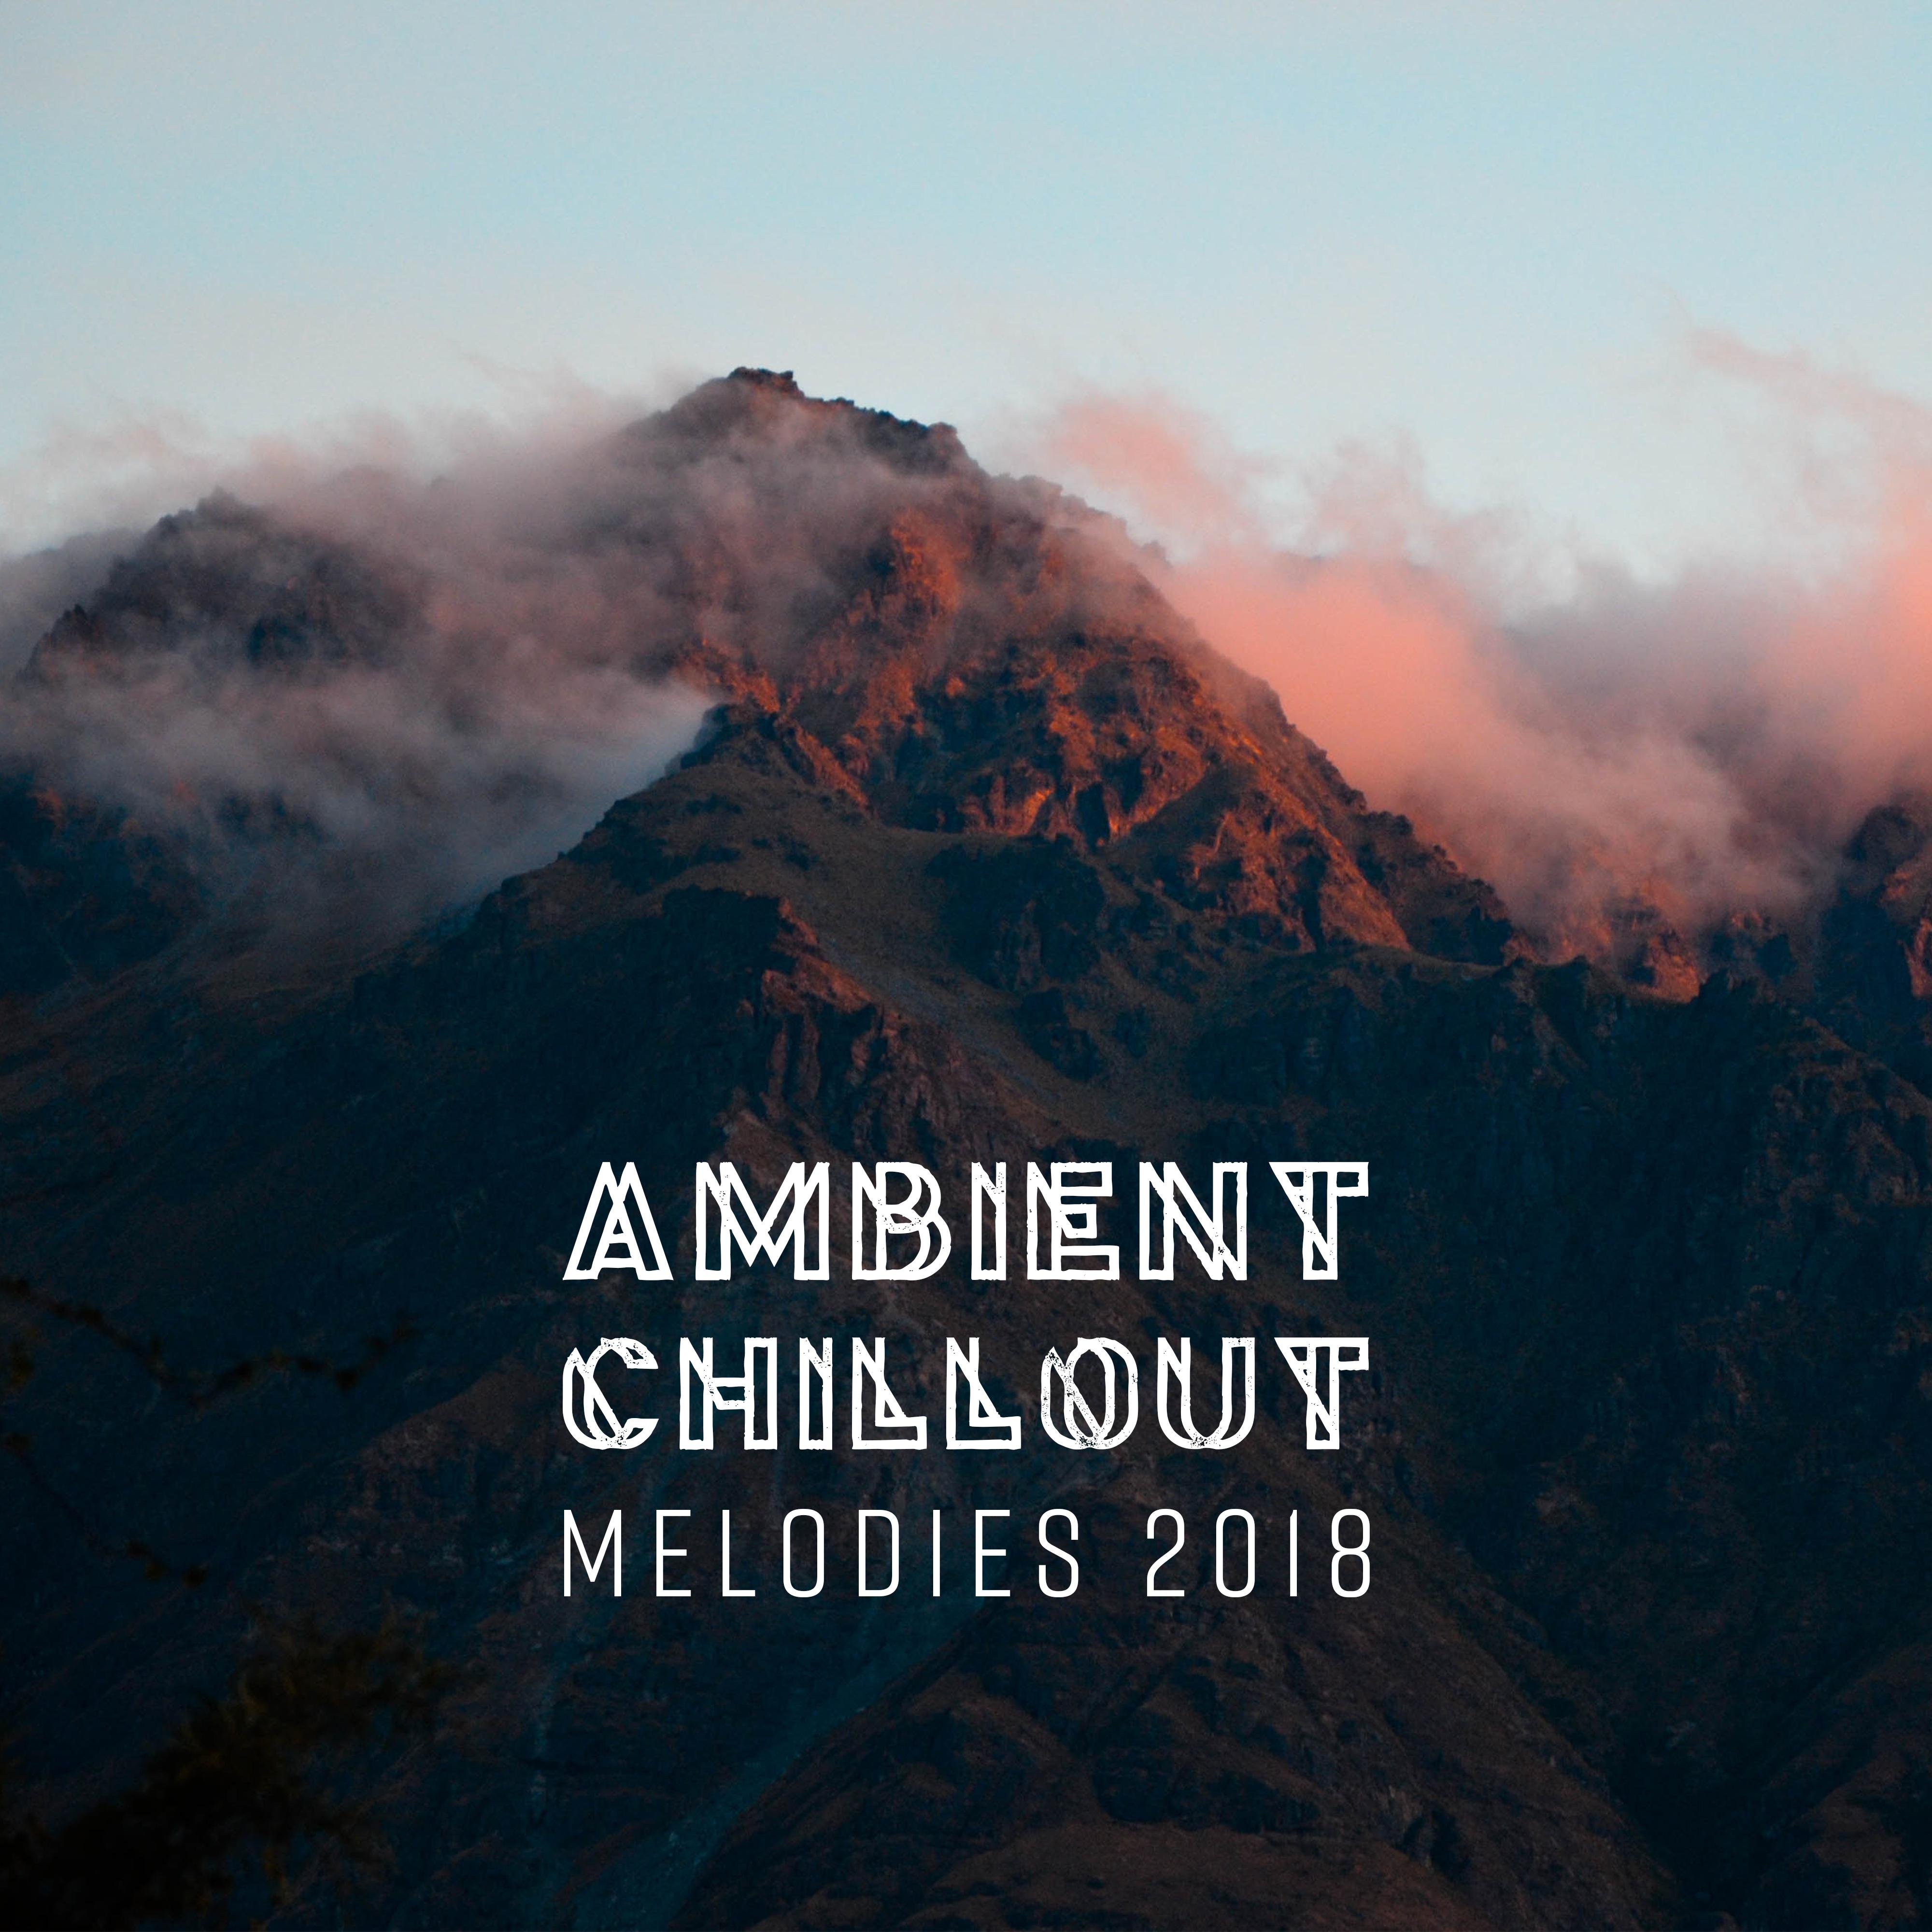 Ambient Chillout Melodies 2018